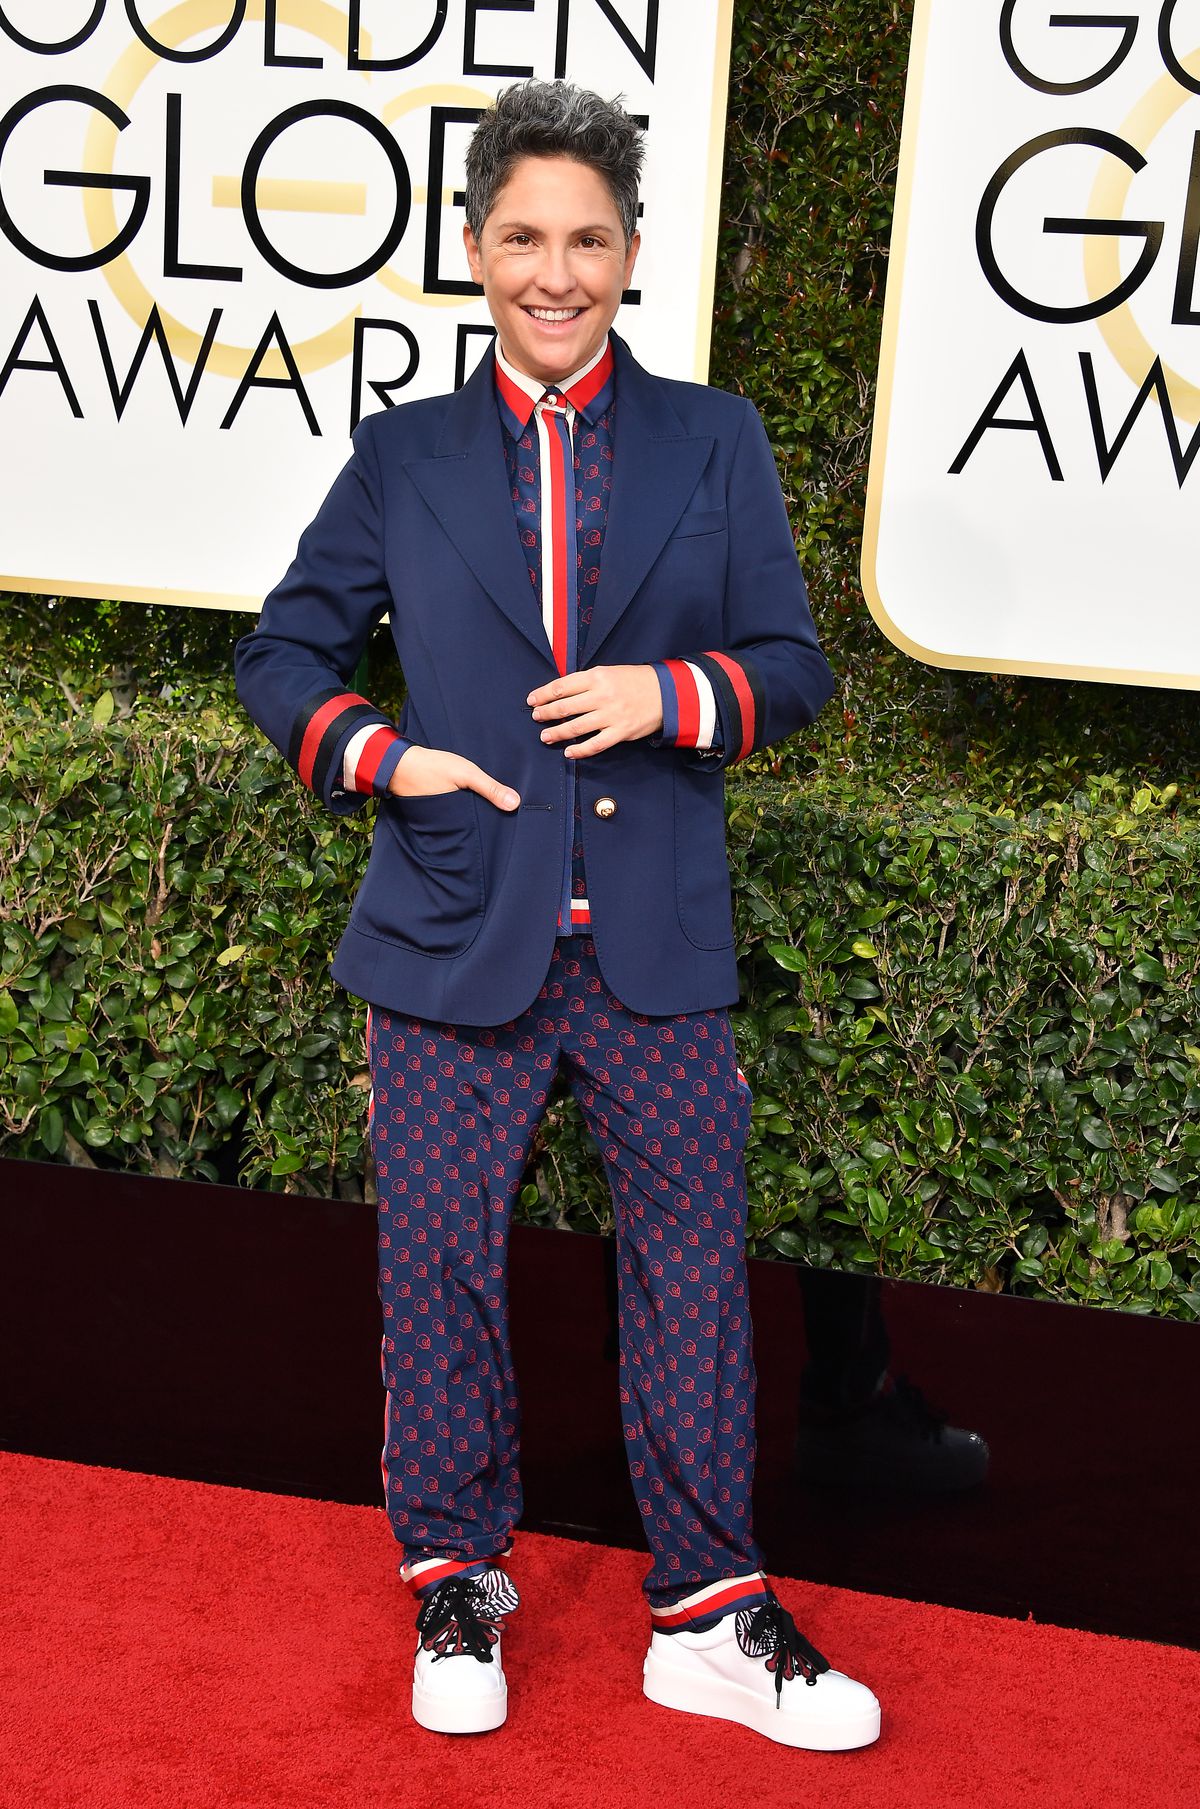 Jill Soloway on the Golden Globes red carpet